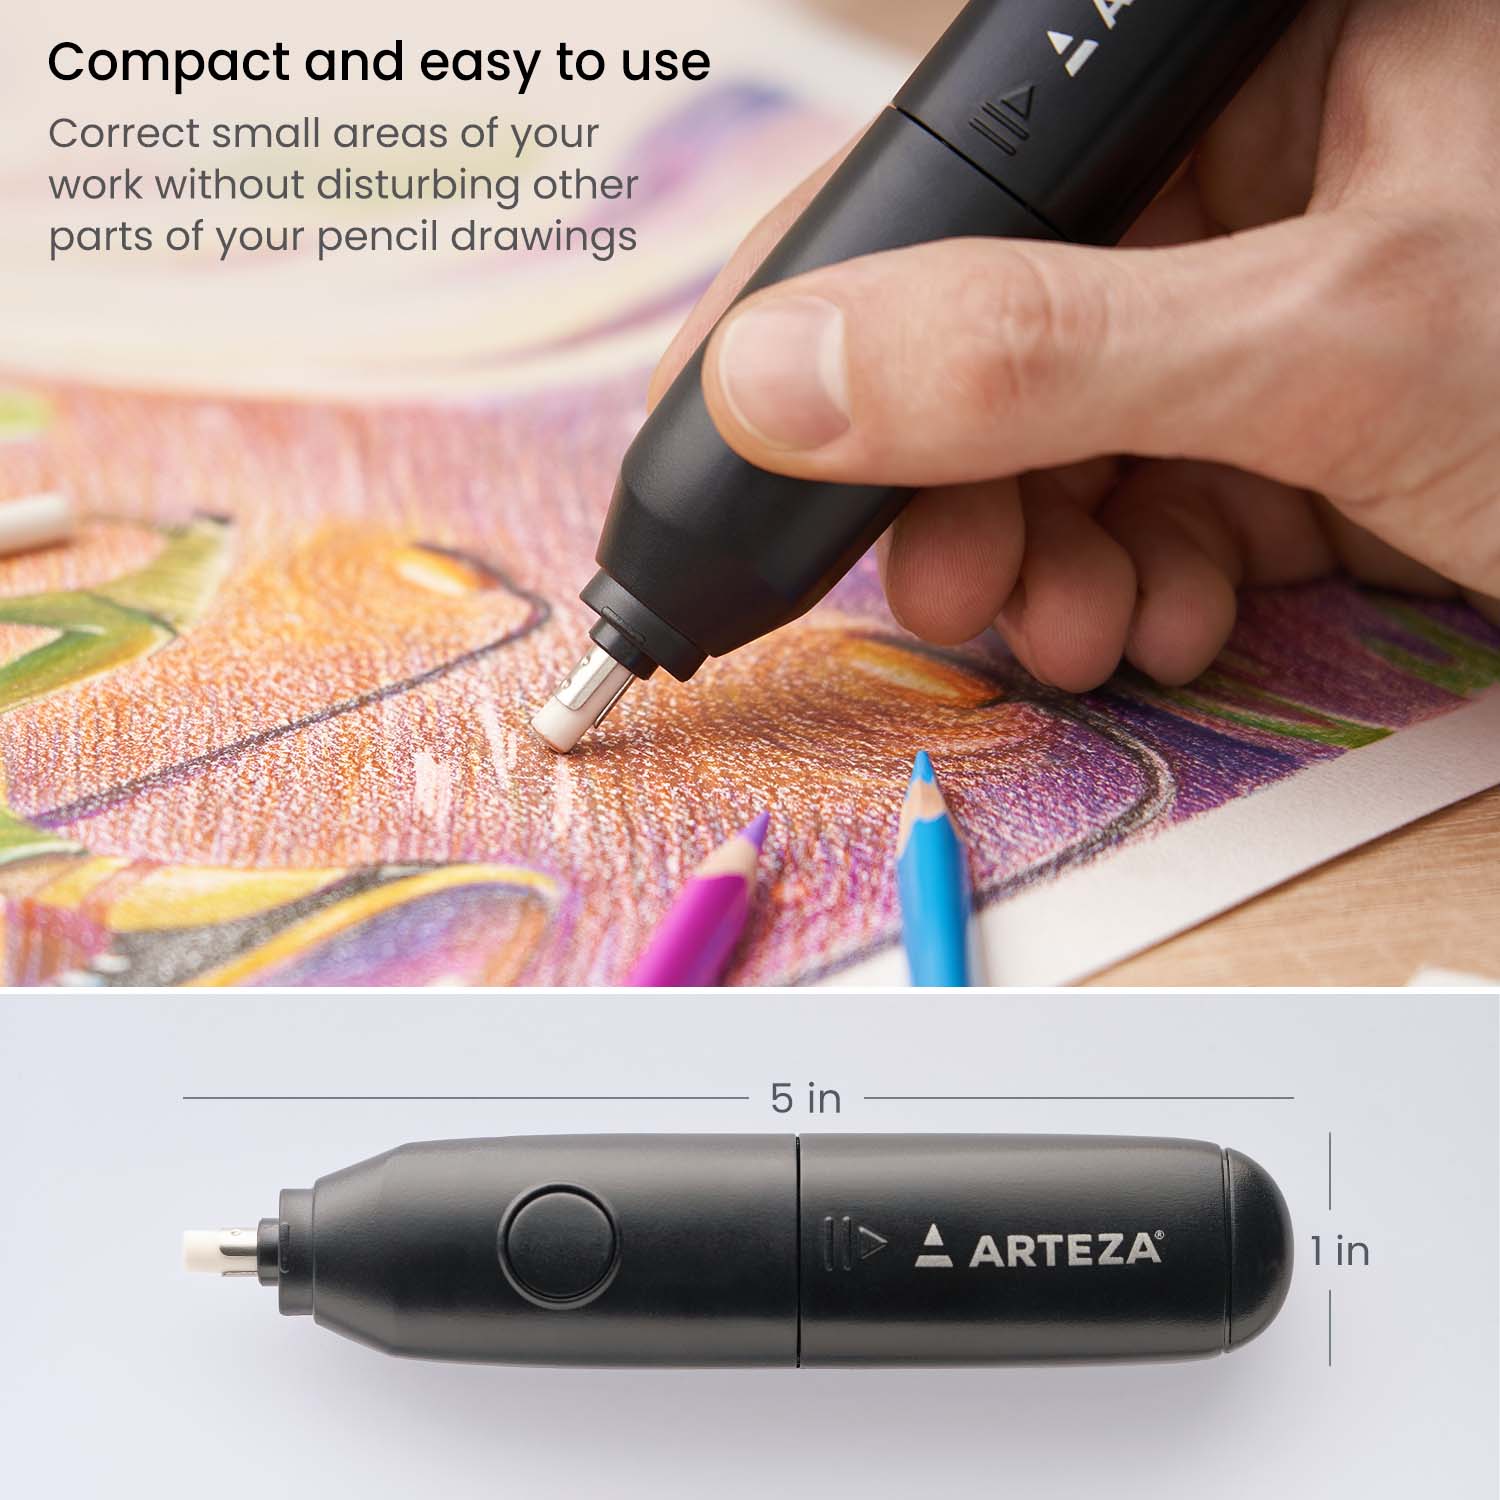 The Electric Eraser - how to use it and what it is amazing at 